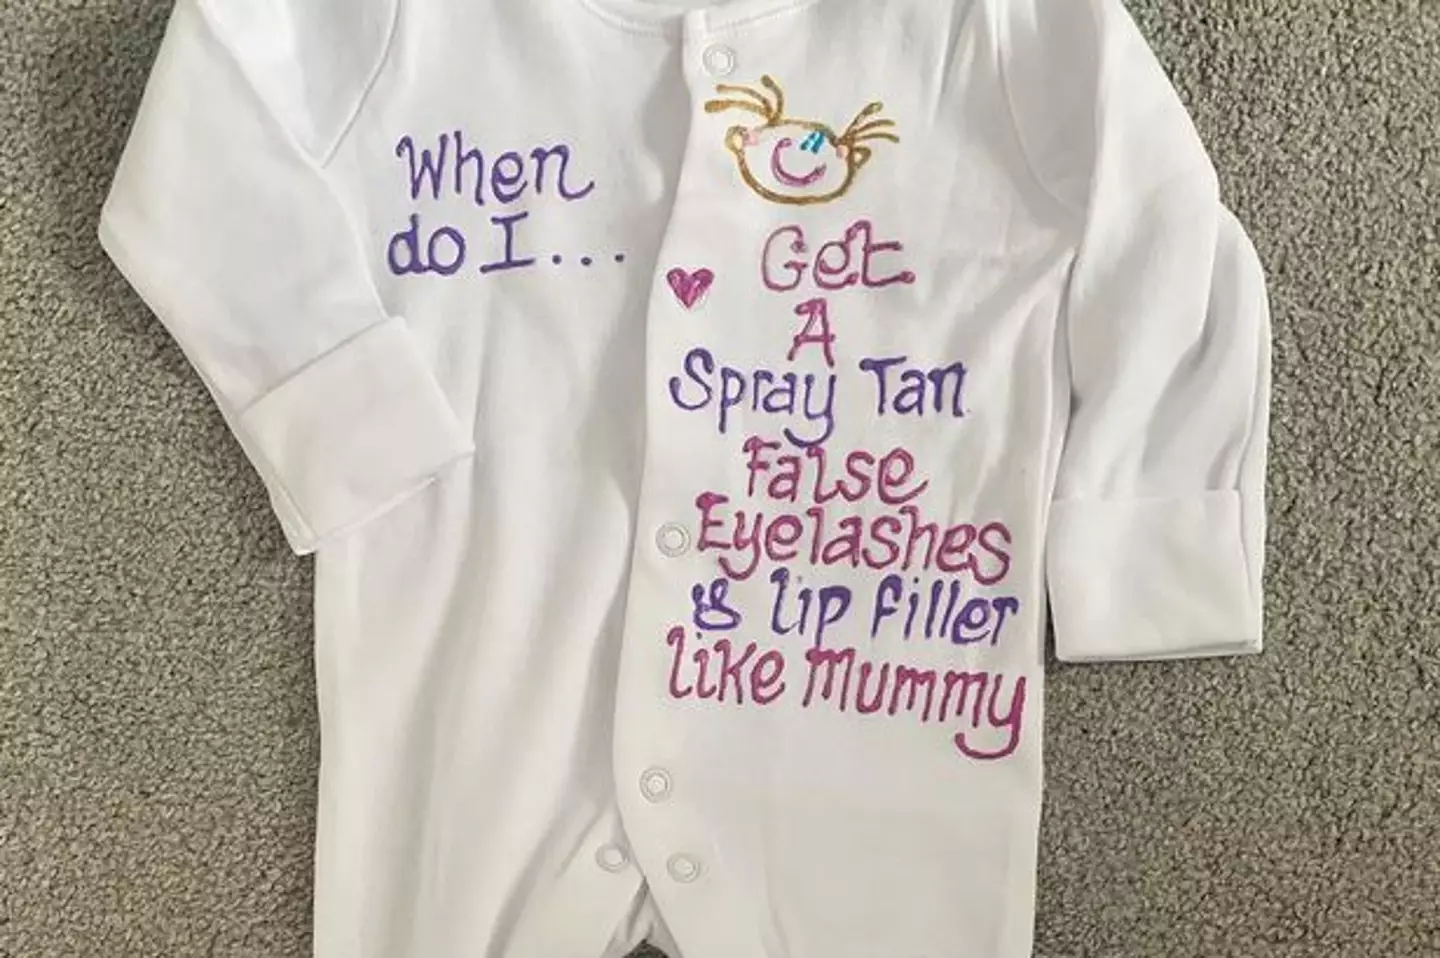 The babygrow featuring the controversial slogan.